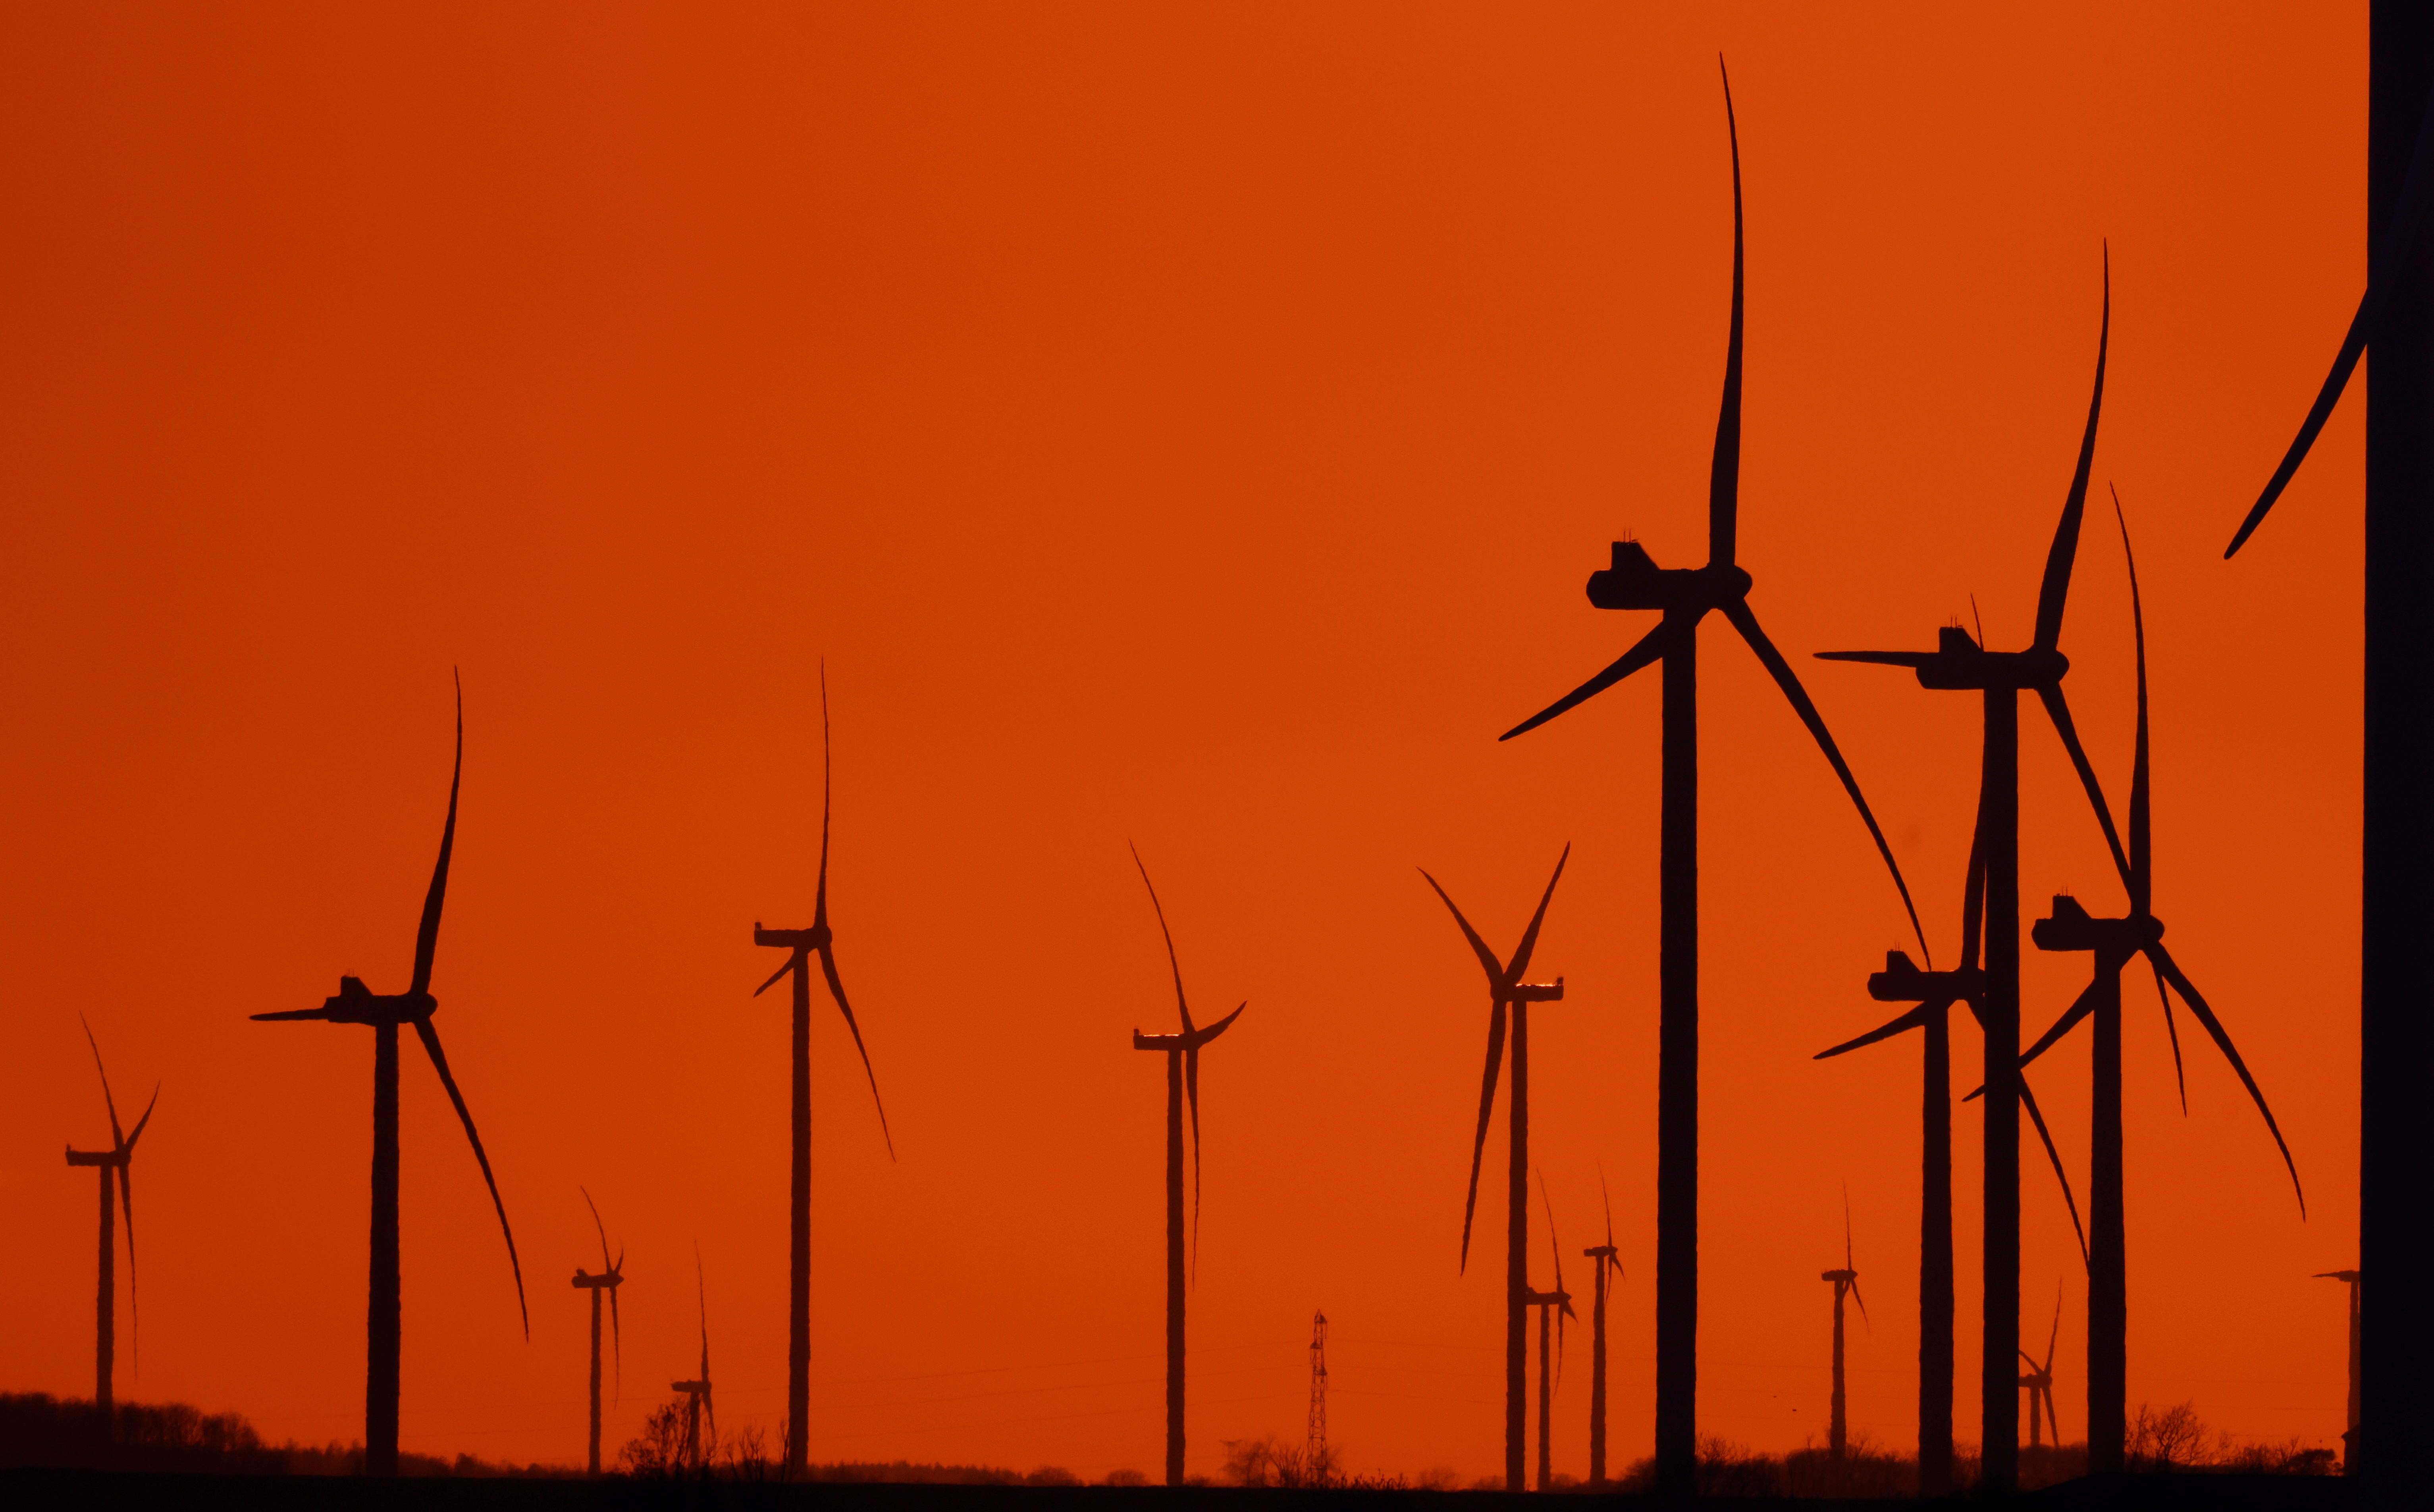 Power-generating windmill turbines are pictured during sunset at a wind park in Havrincourt